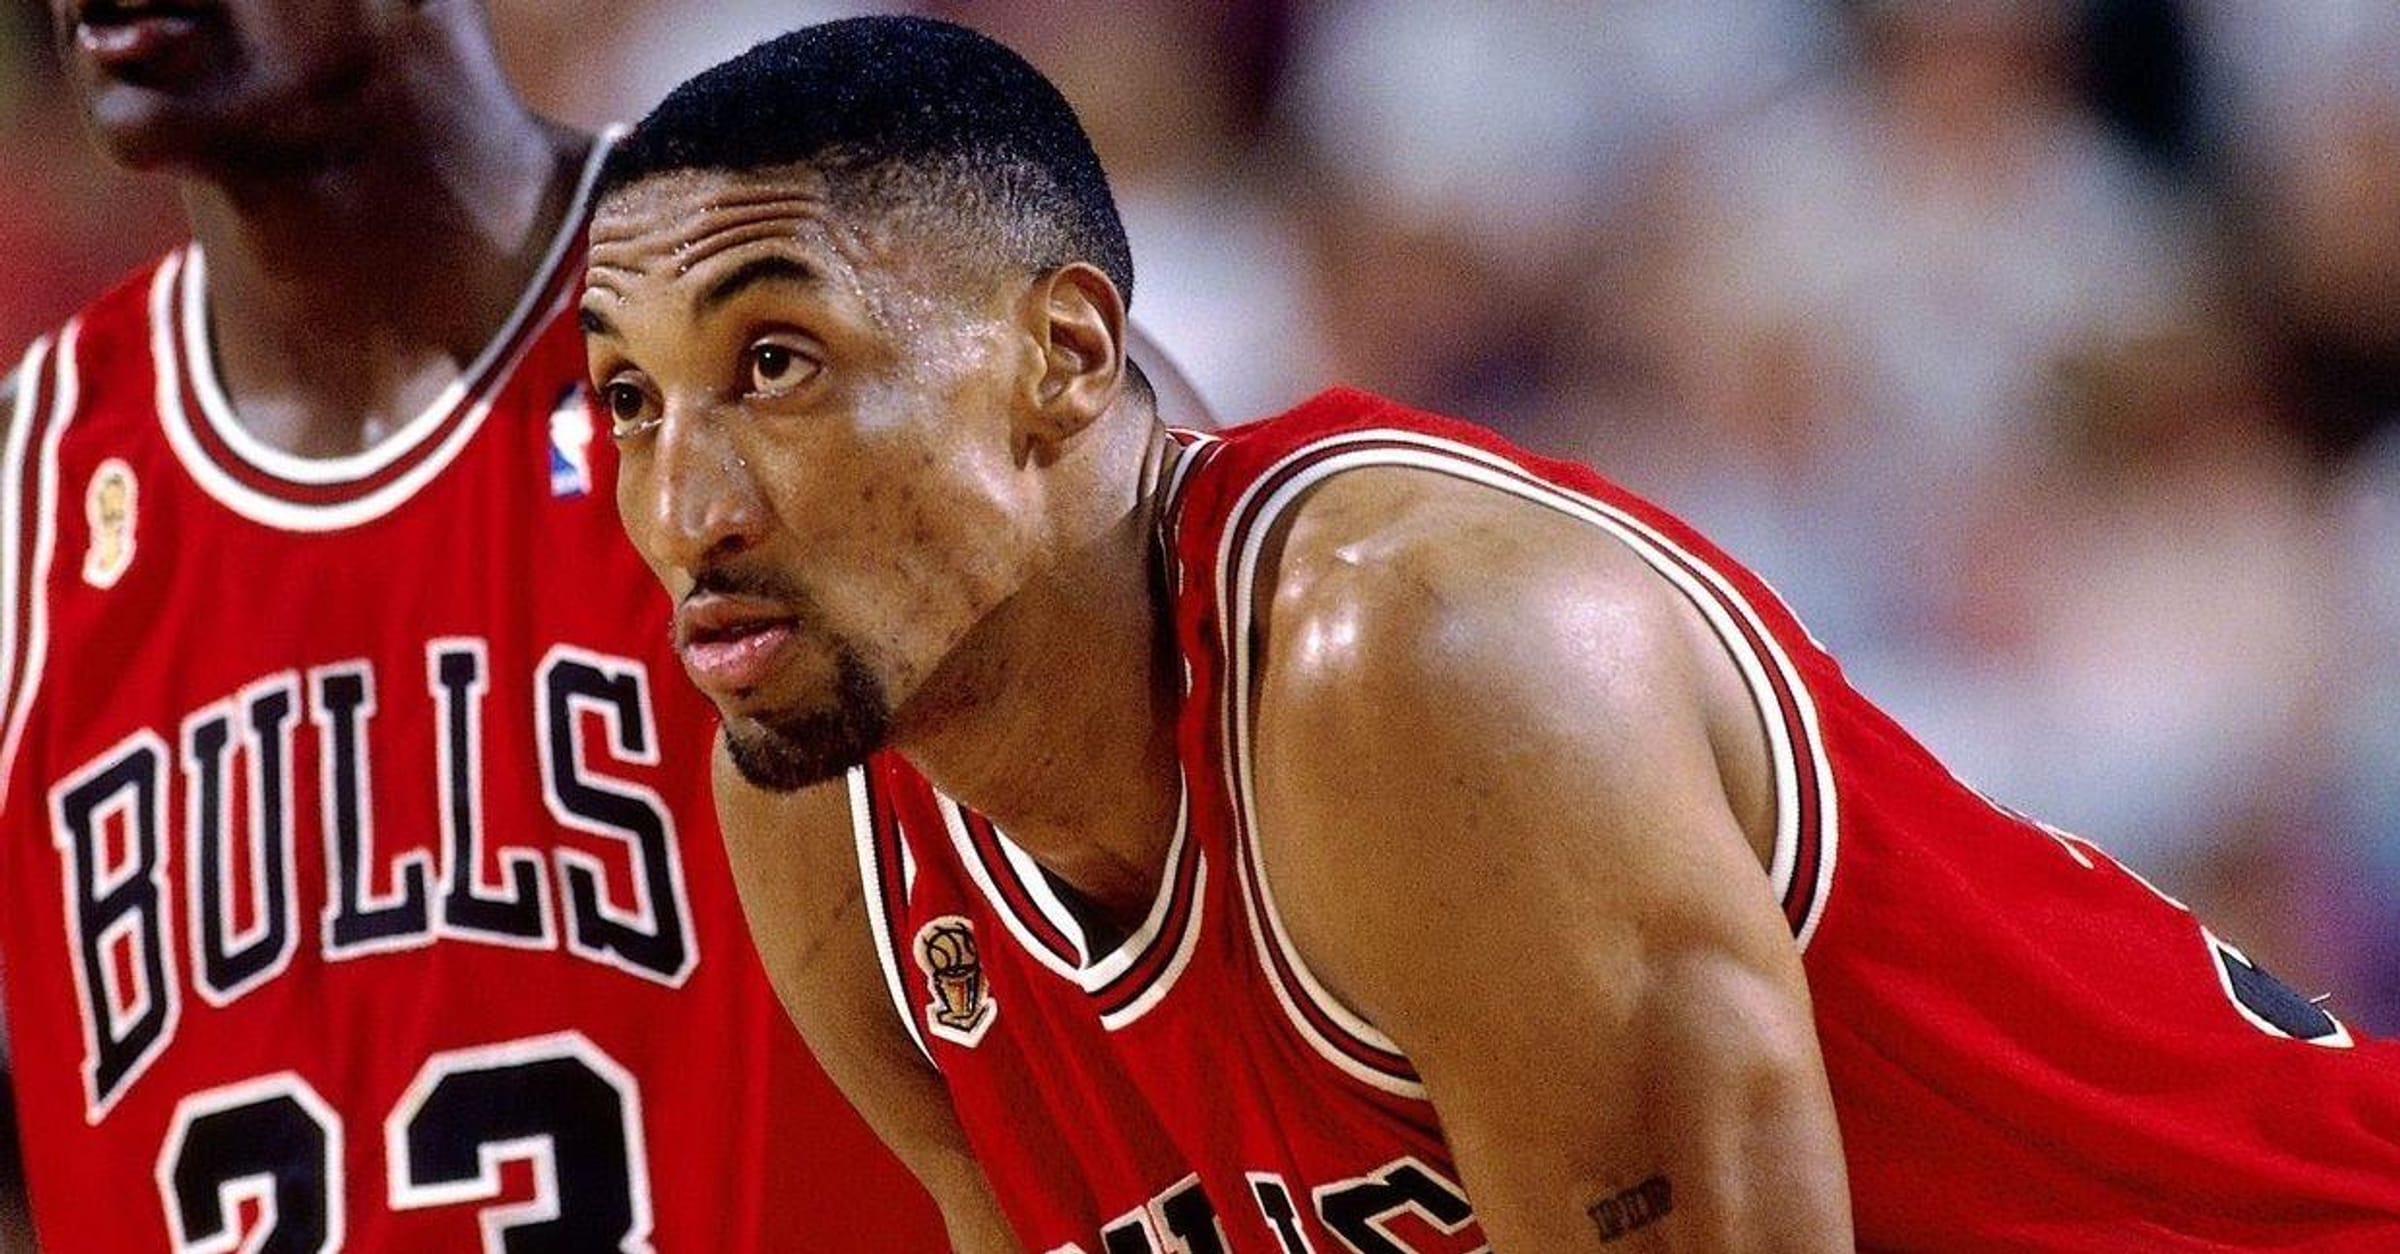 25 greatest small forwards in NBA history, ranked